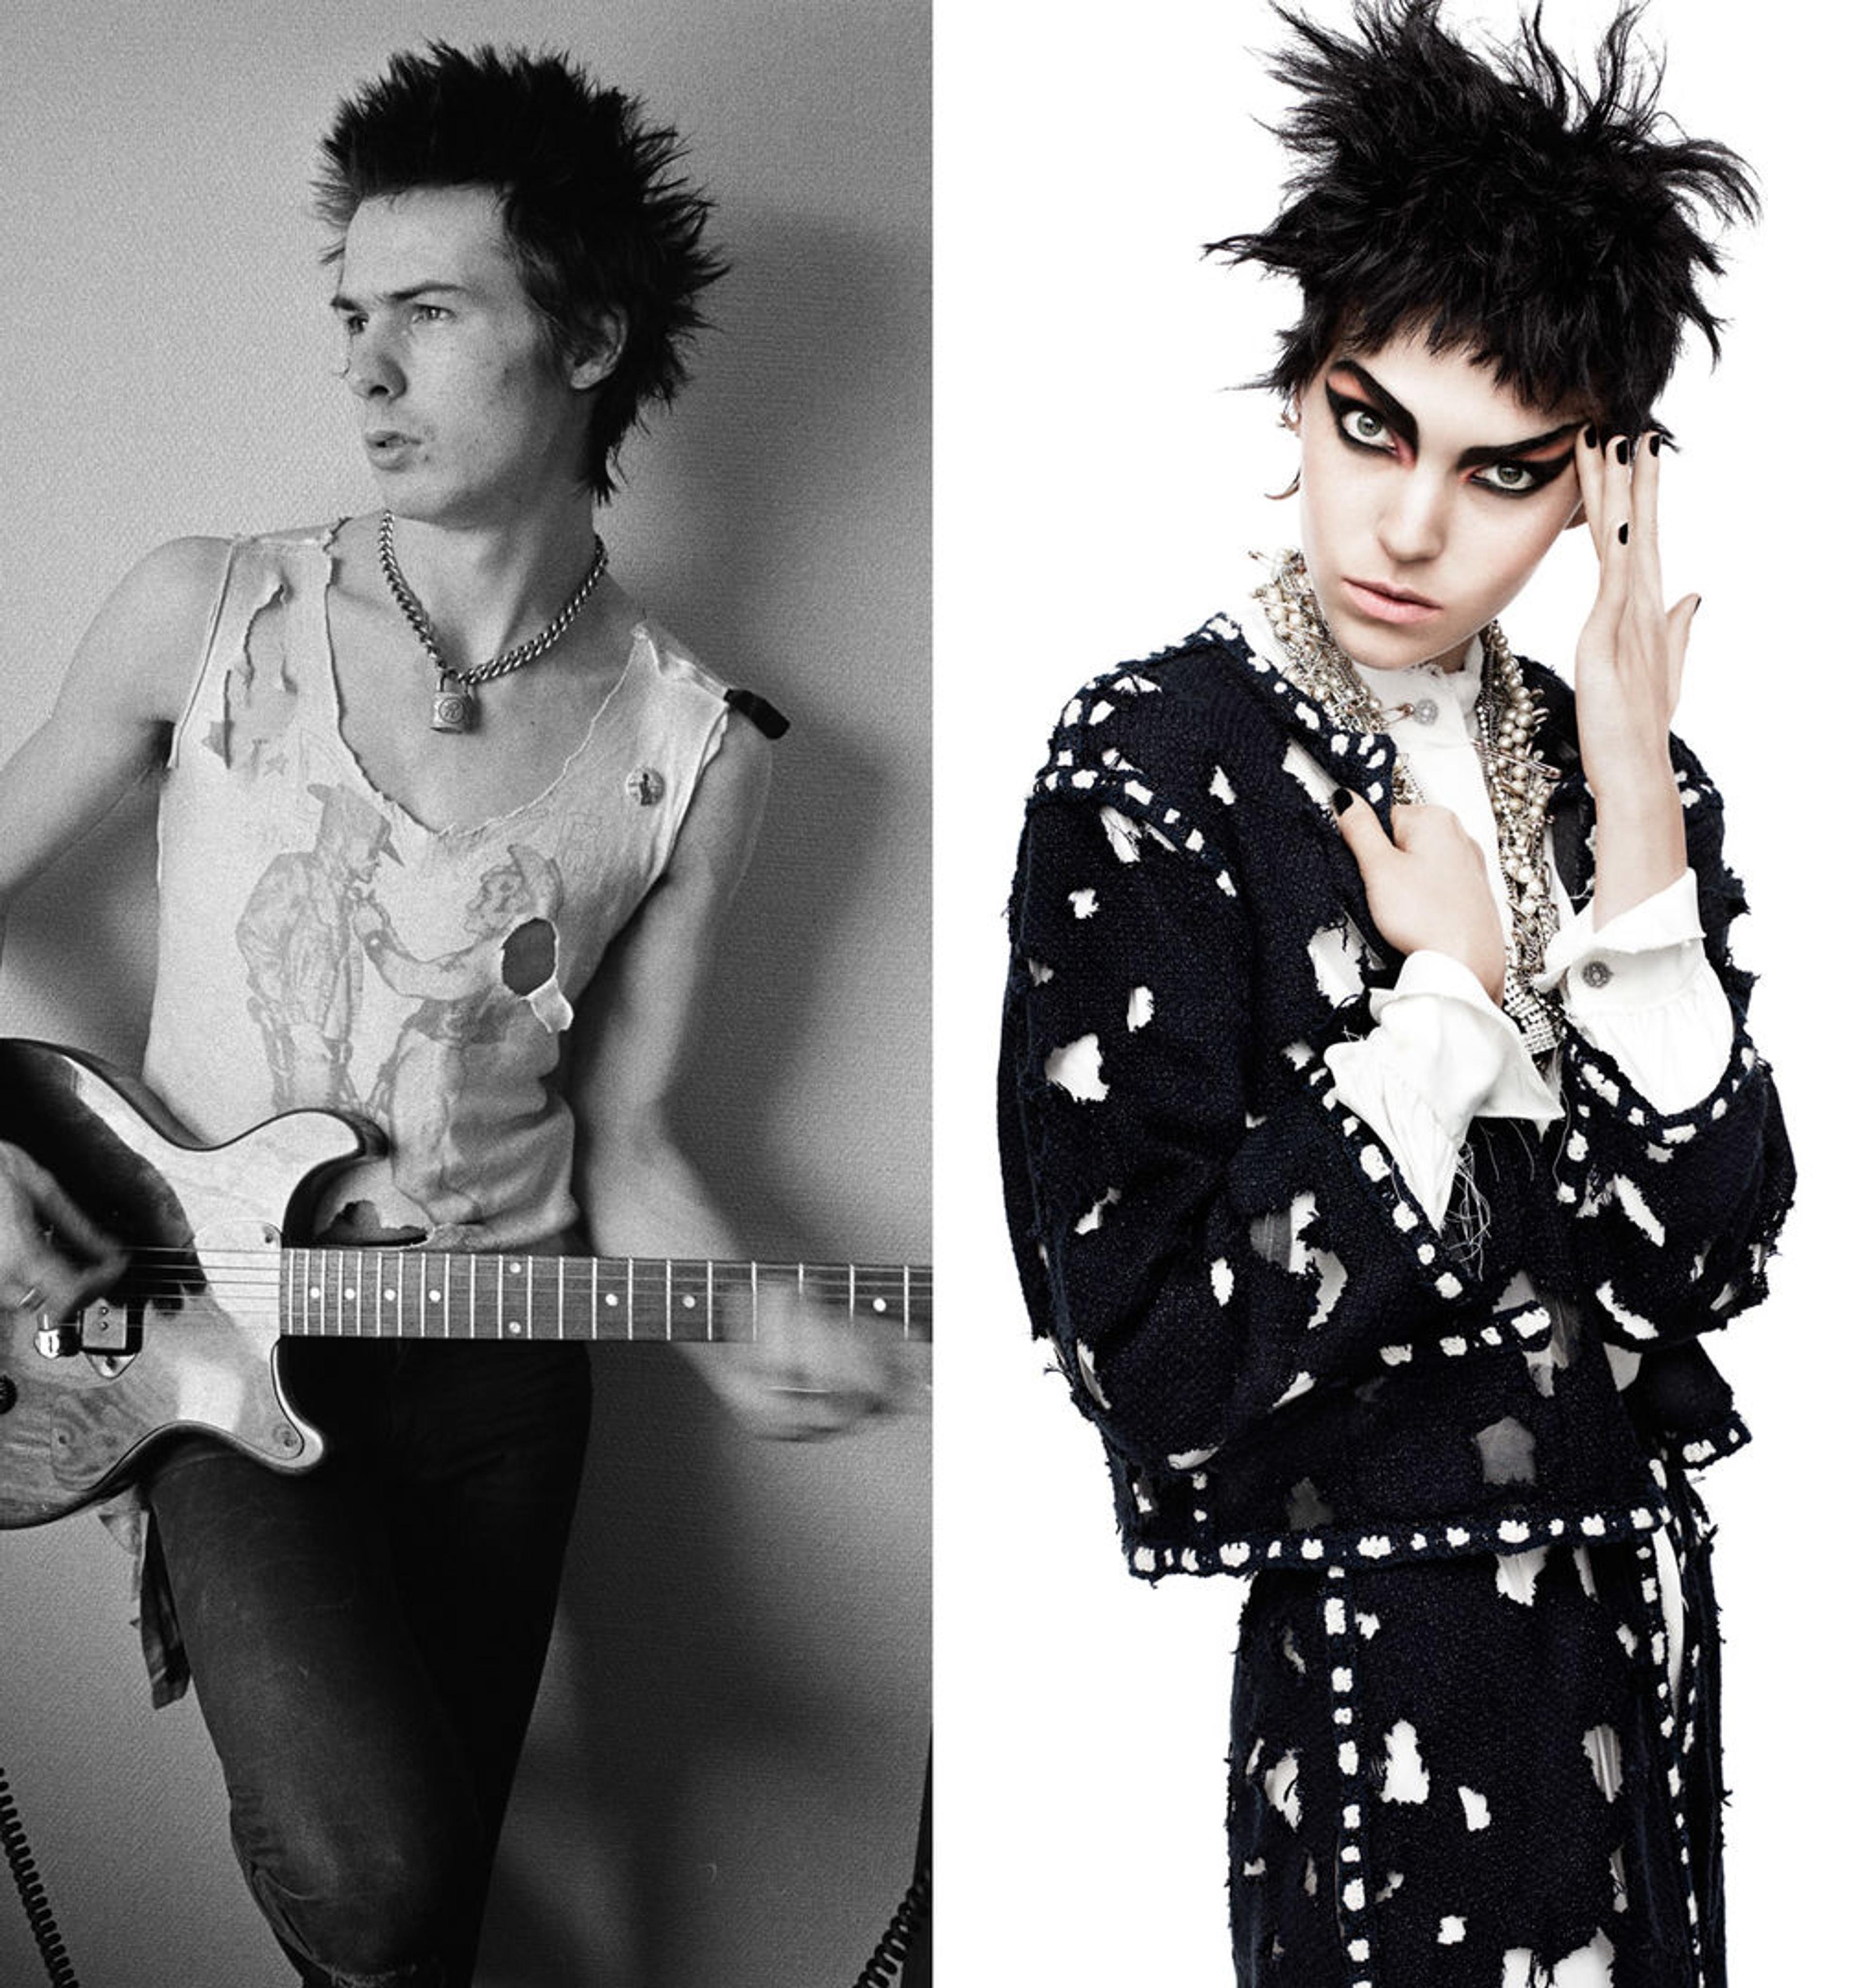 Two images: at left, Sid Vicious with his guitar; at right, a model wearing couture inspired by the punk movement